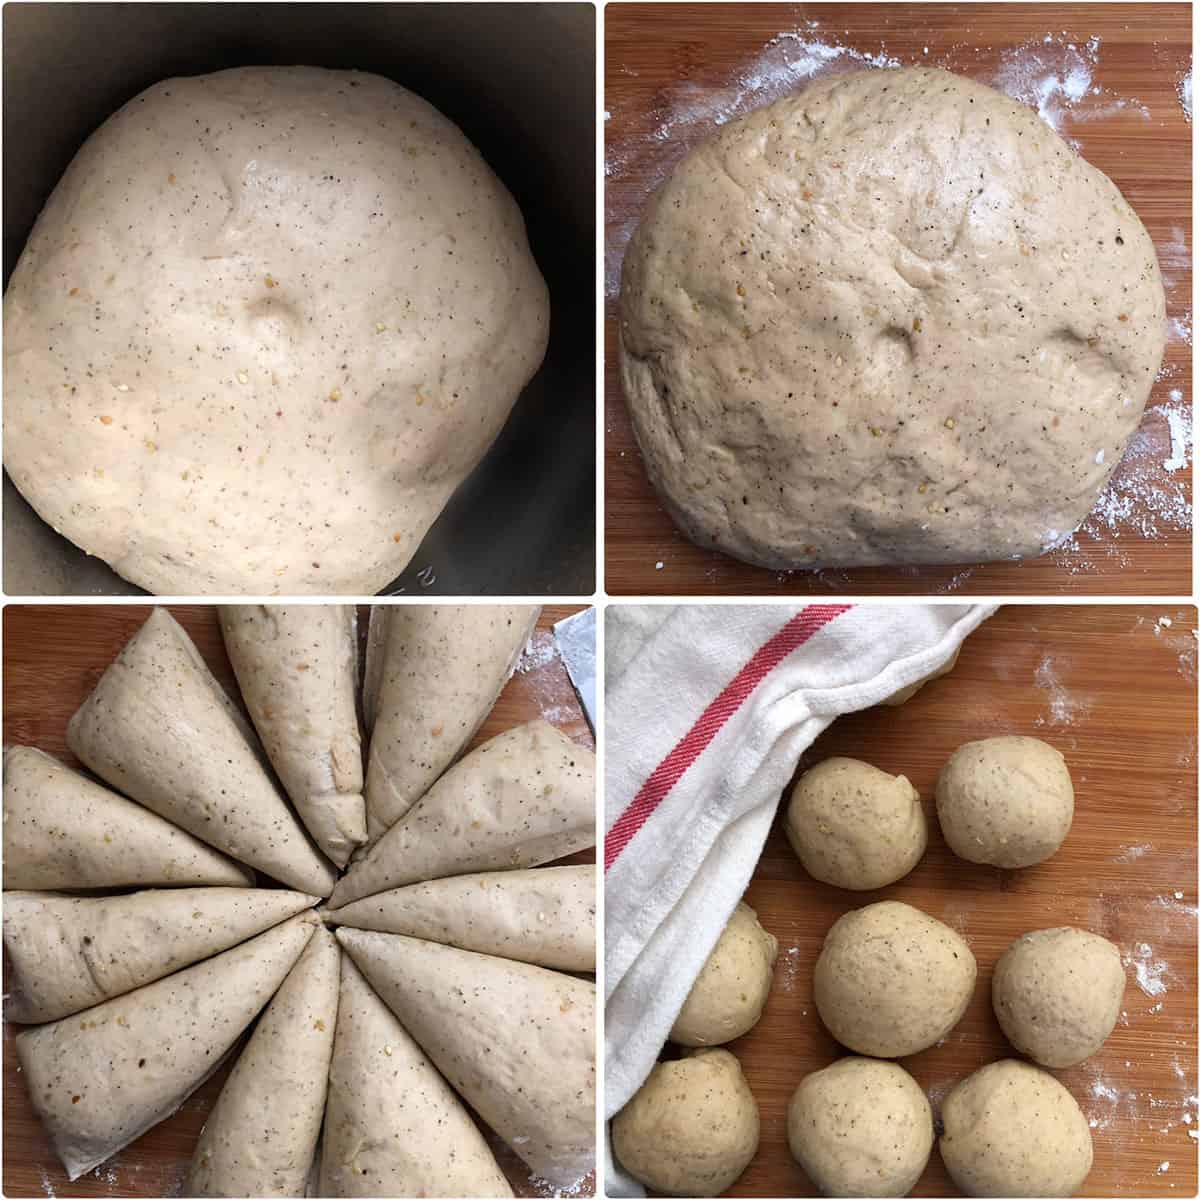 Proofed dough, divided into equal pieces and rolled into balls